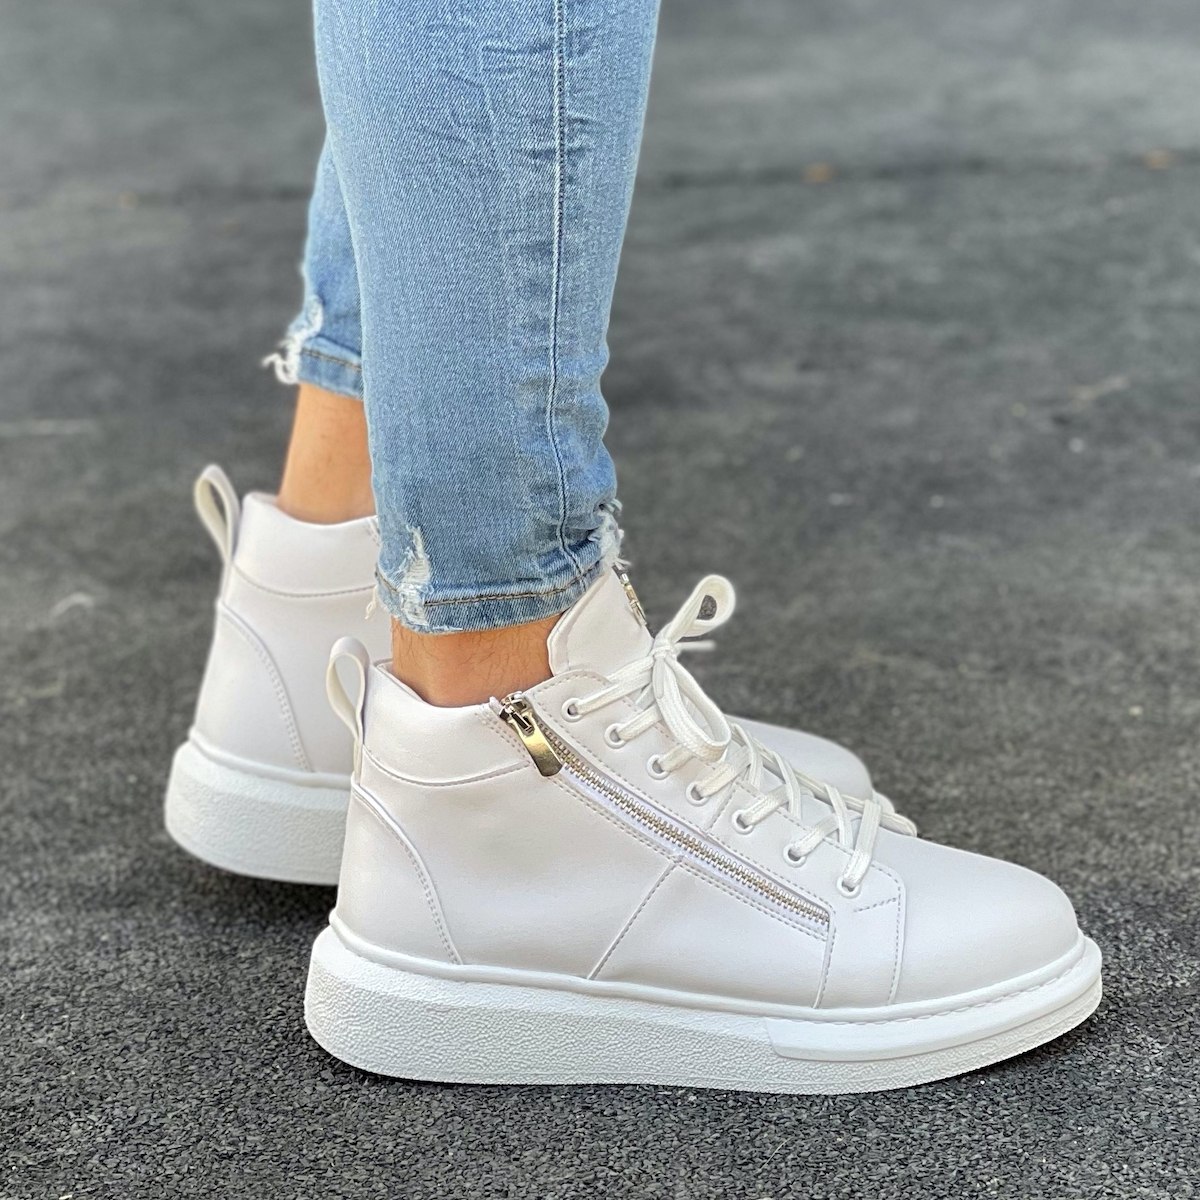 Buy Forever Glam by Pantaloons Women's White Ankle High Sneakers for Women  at Best Price @ Tata CLiQ